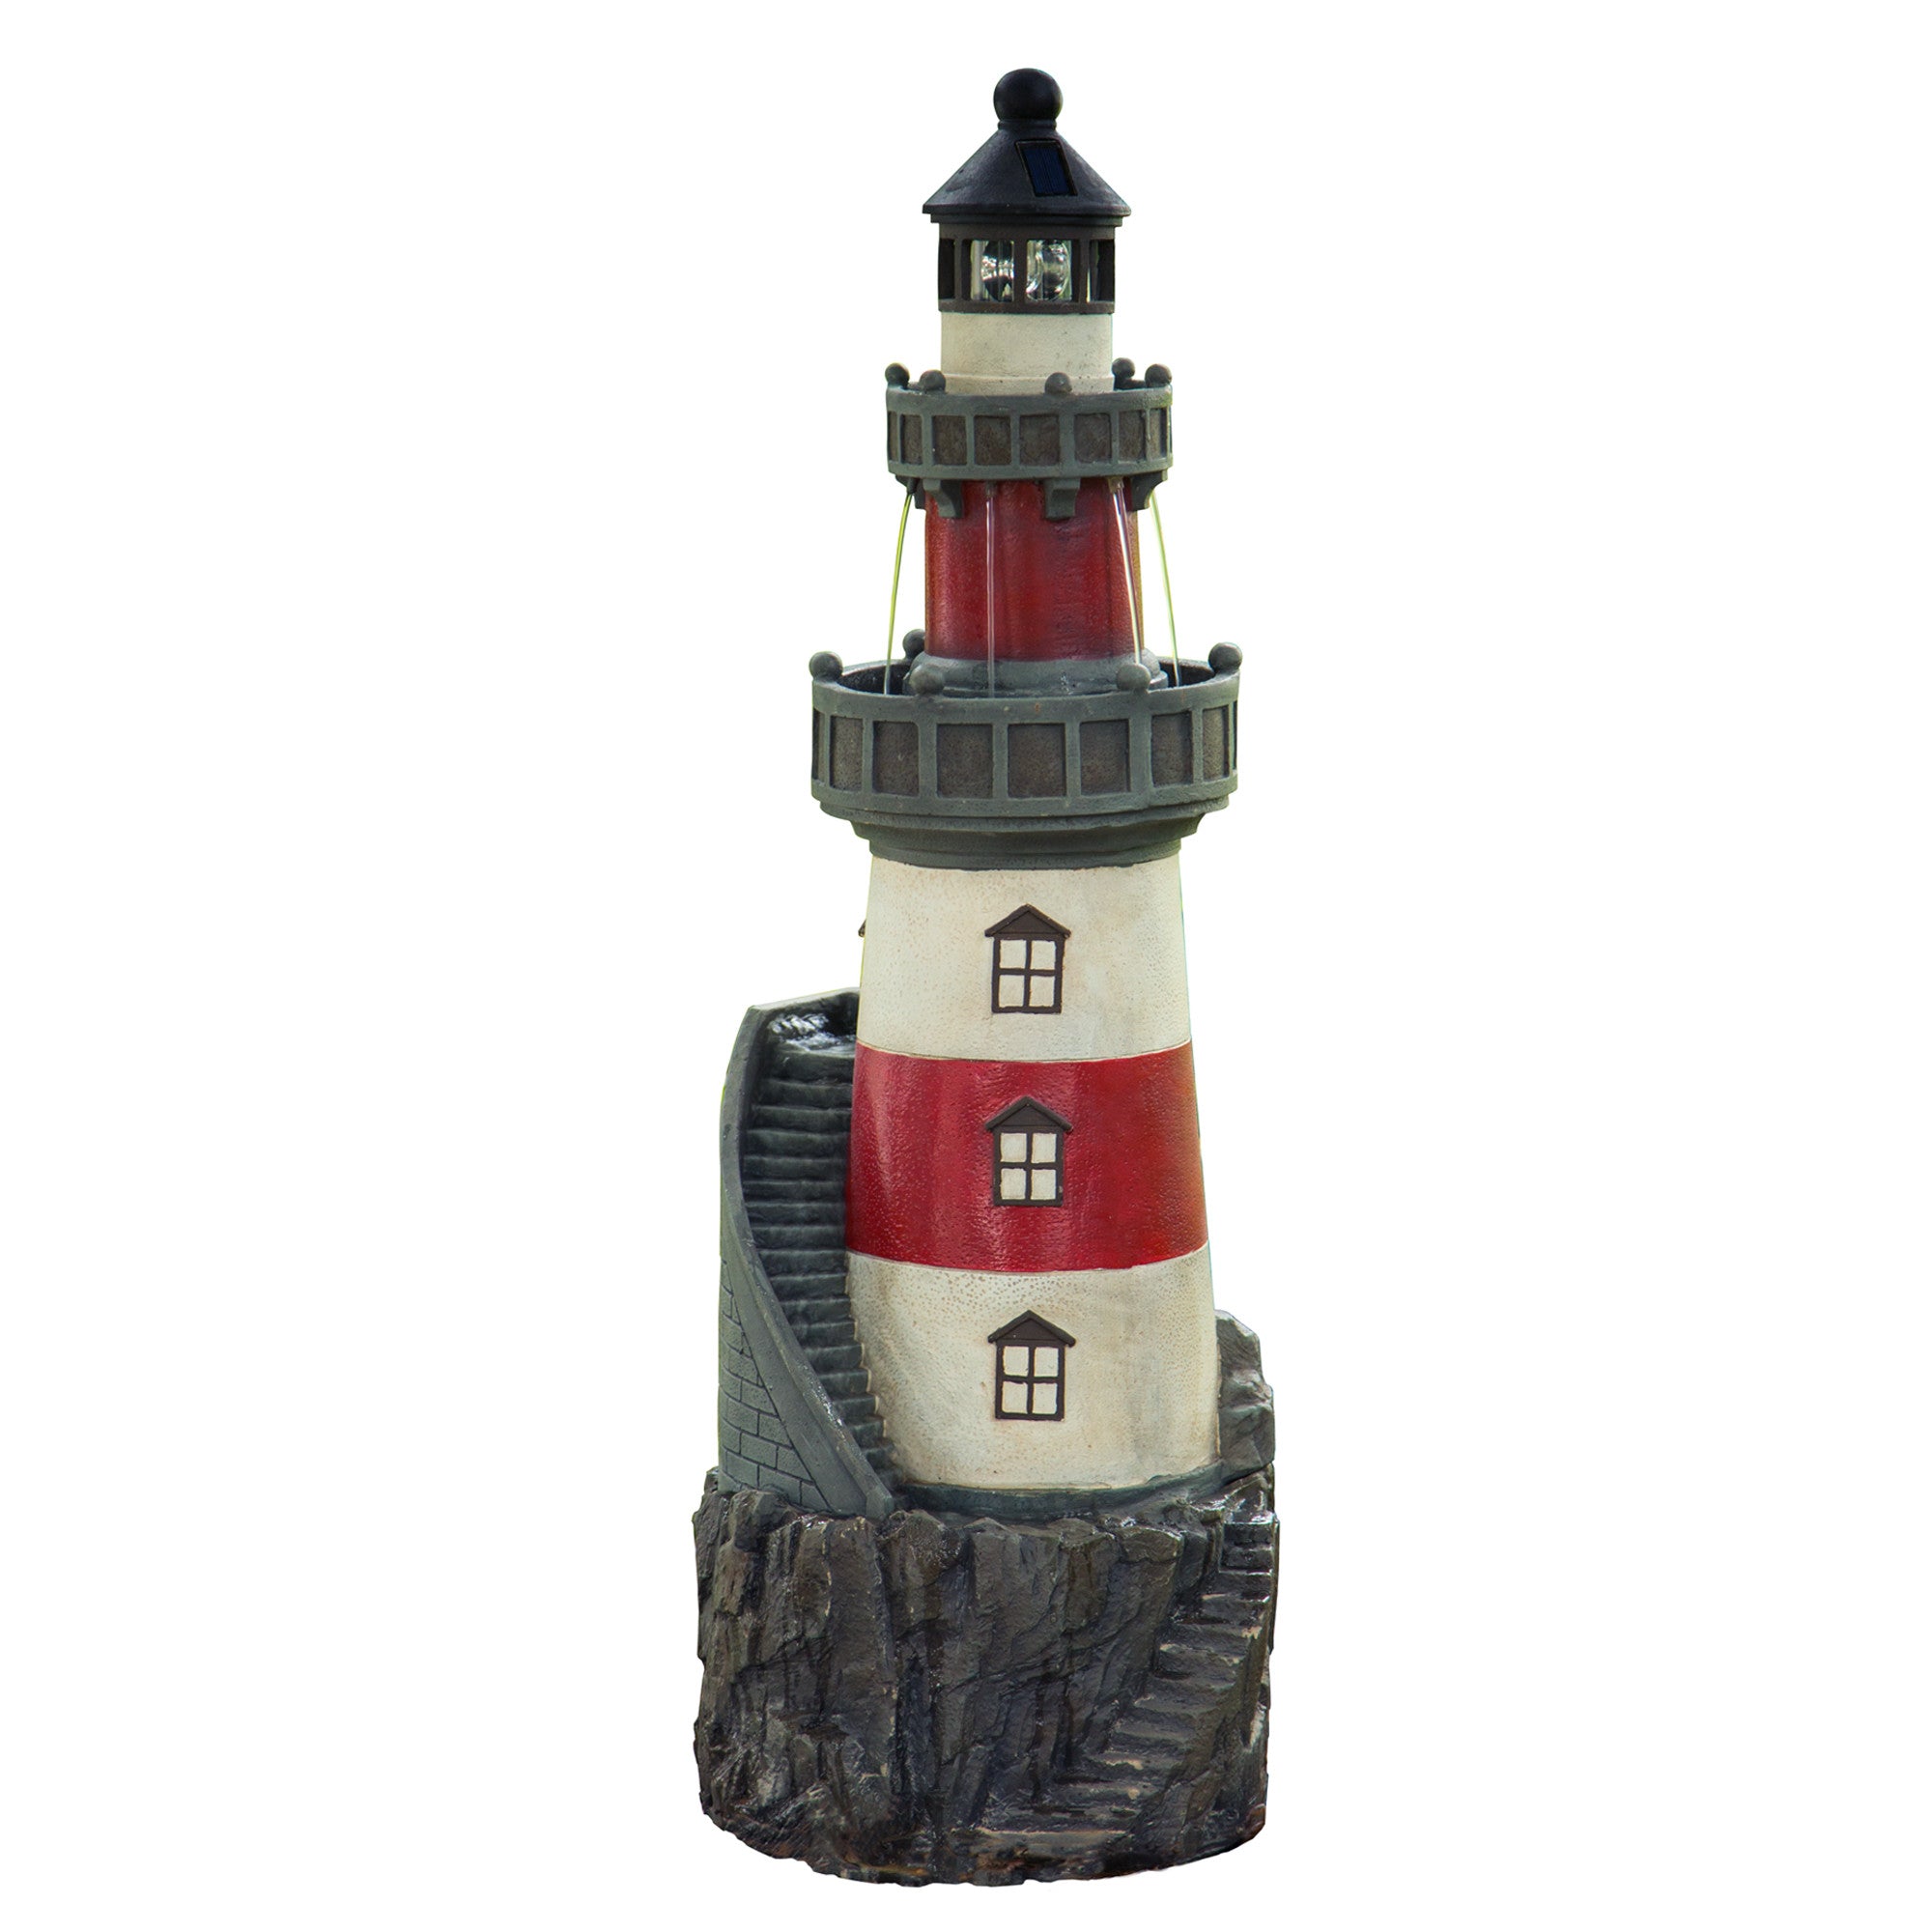 Teamson Home Outdoor Solar Light House Fountain with Rotating LED Light, Red/White